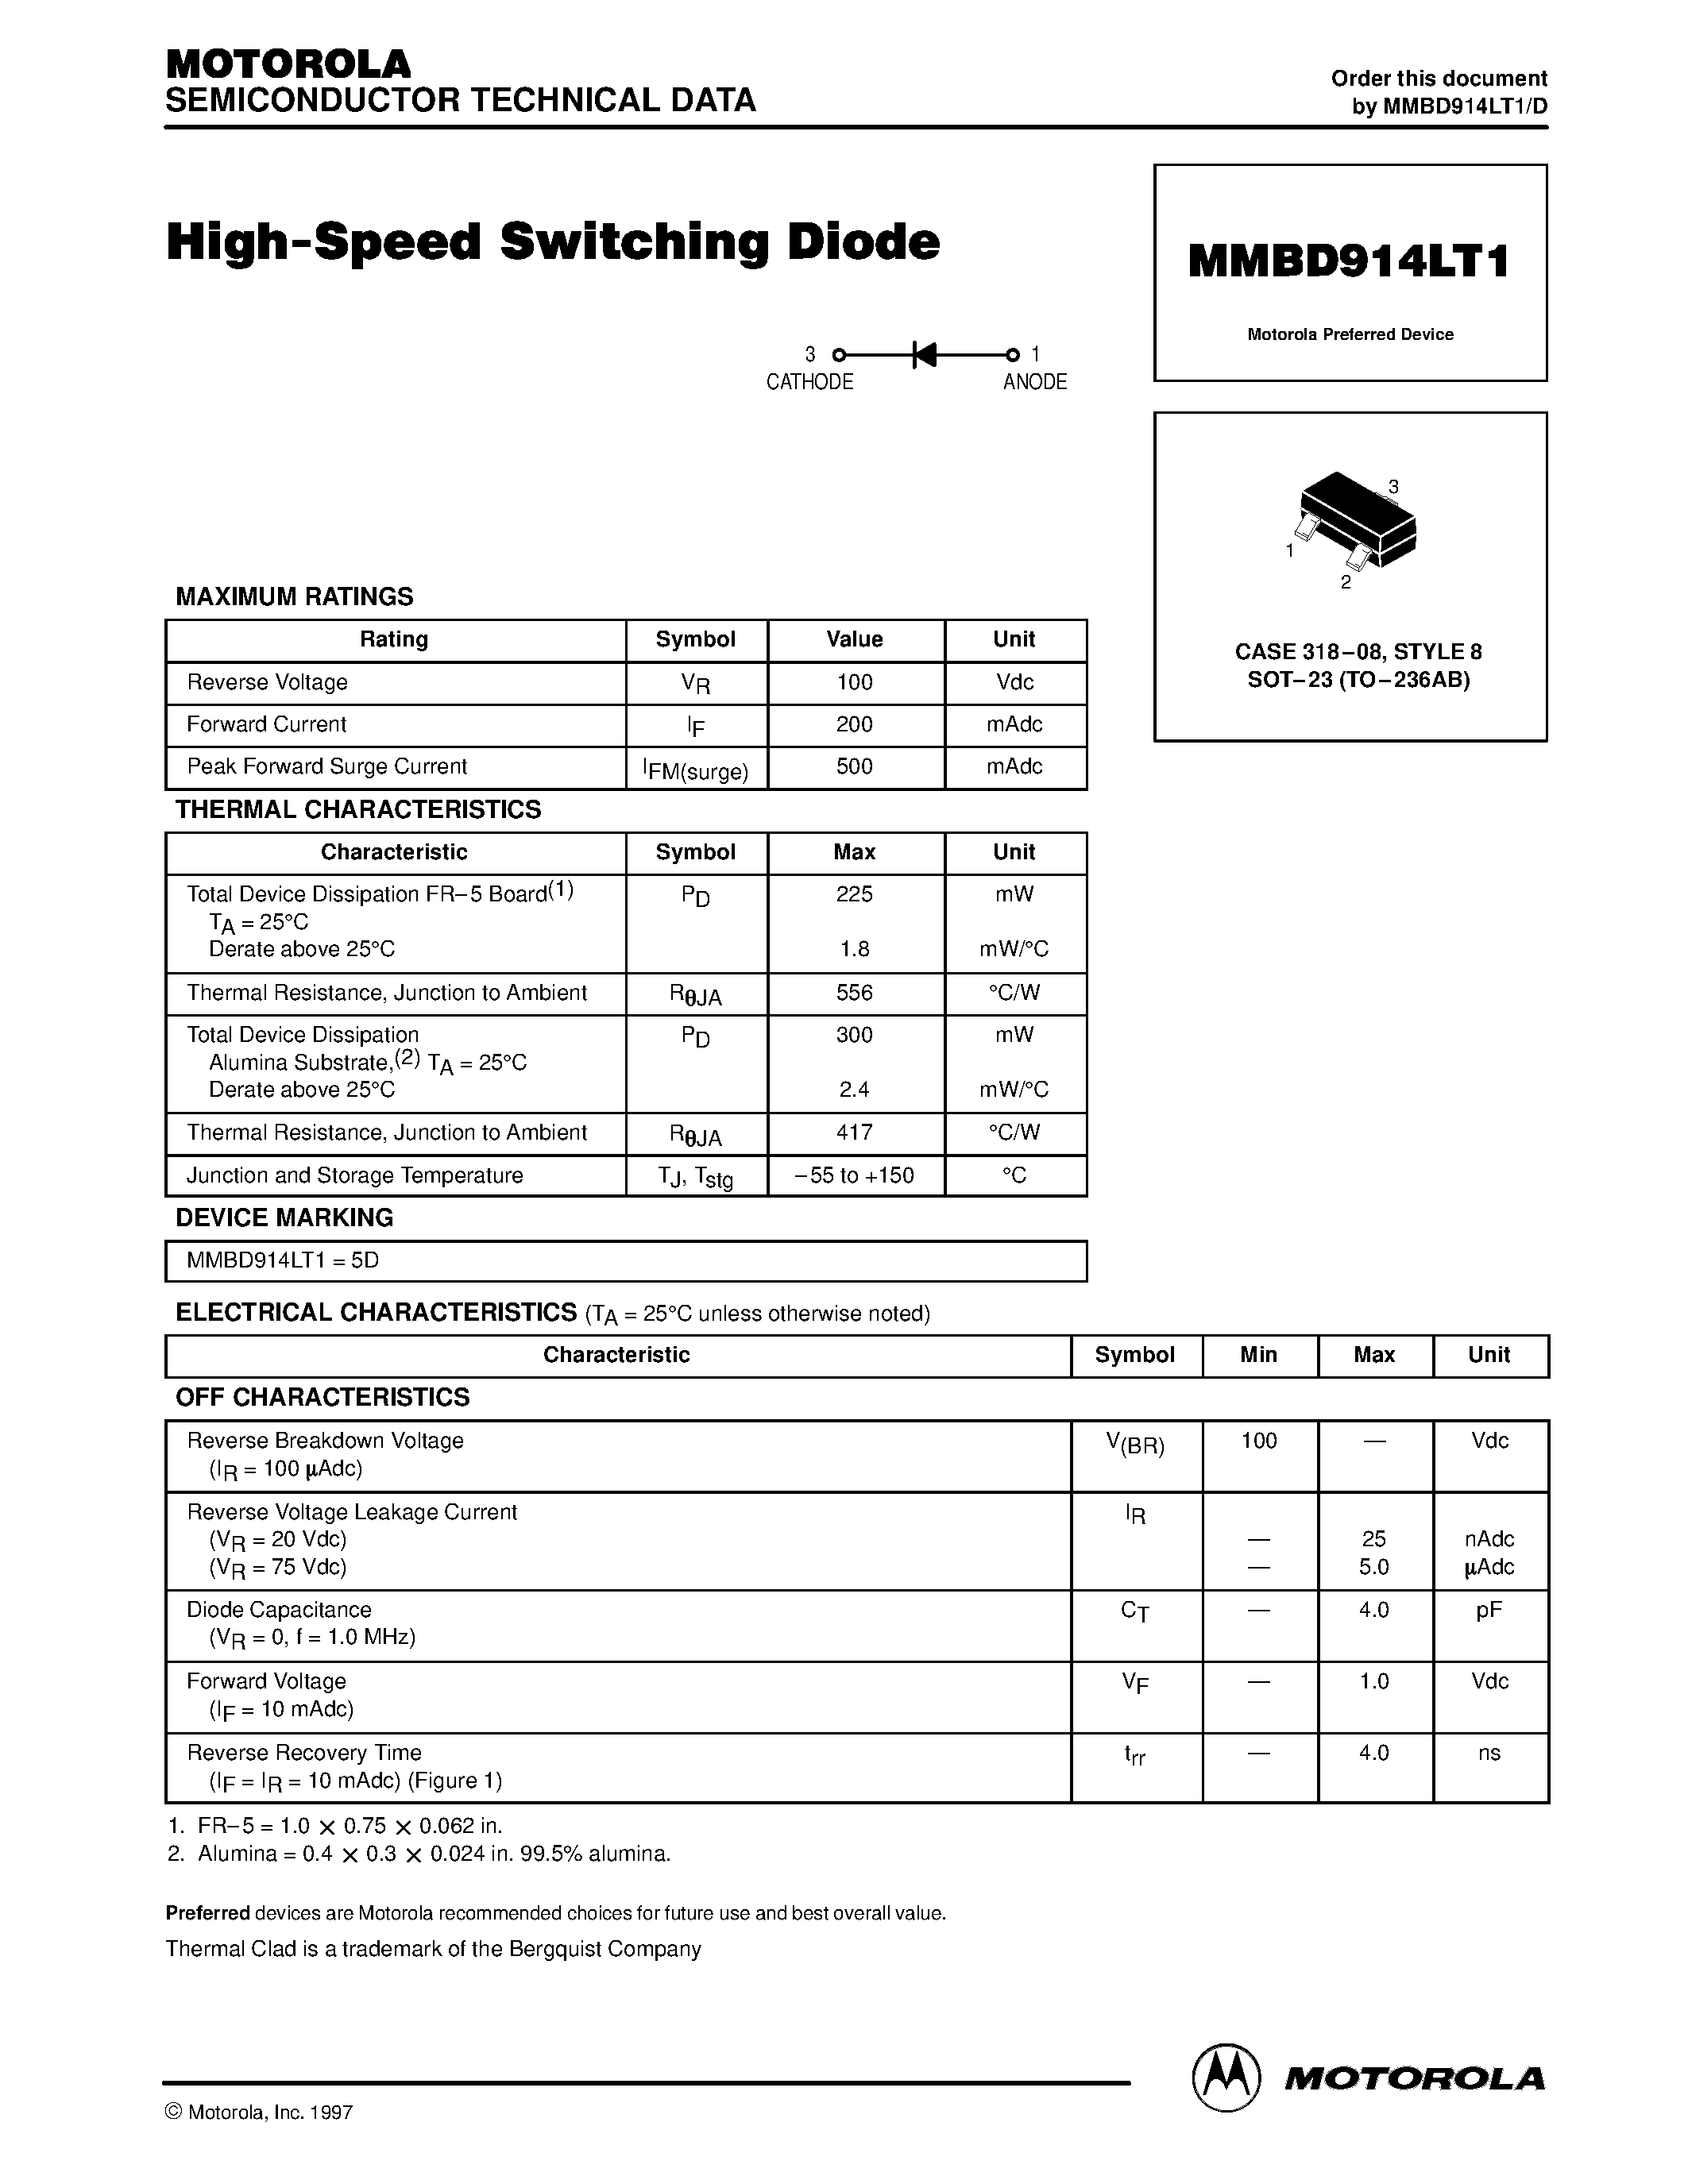 Datasheet MMBD914L - High-Speed Switching Diode page 1